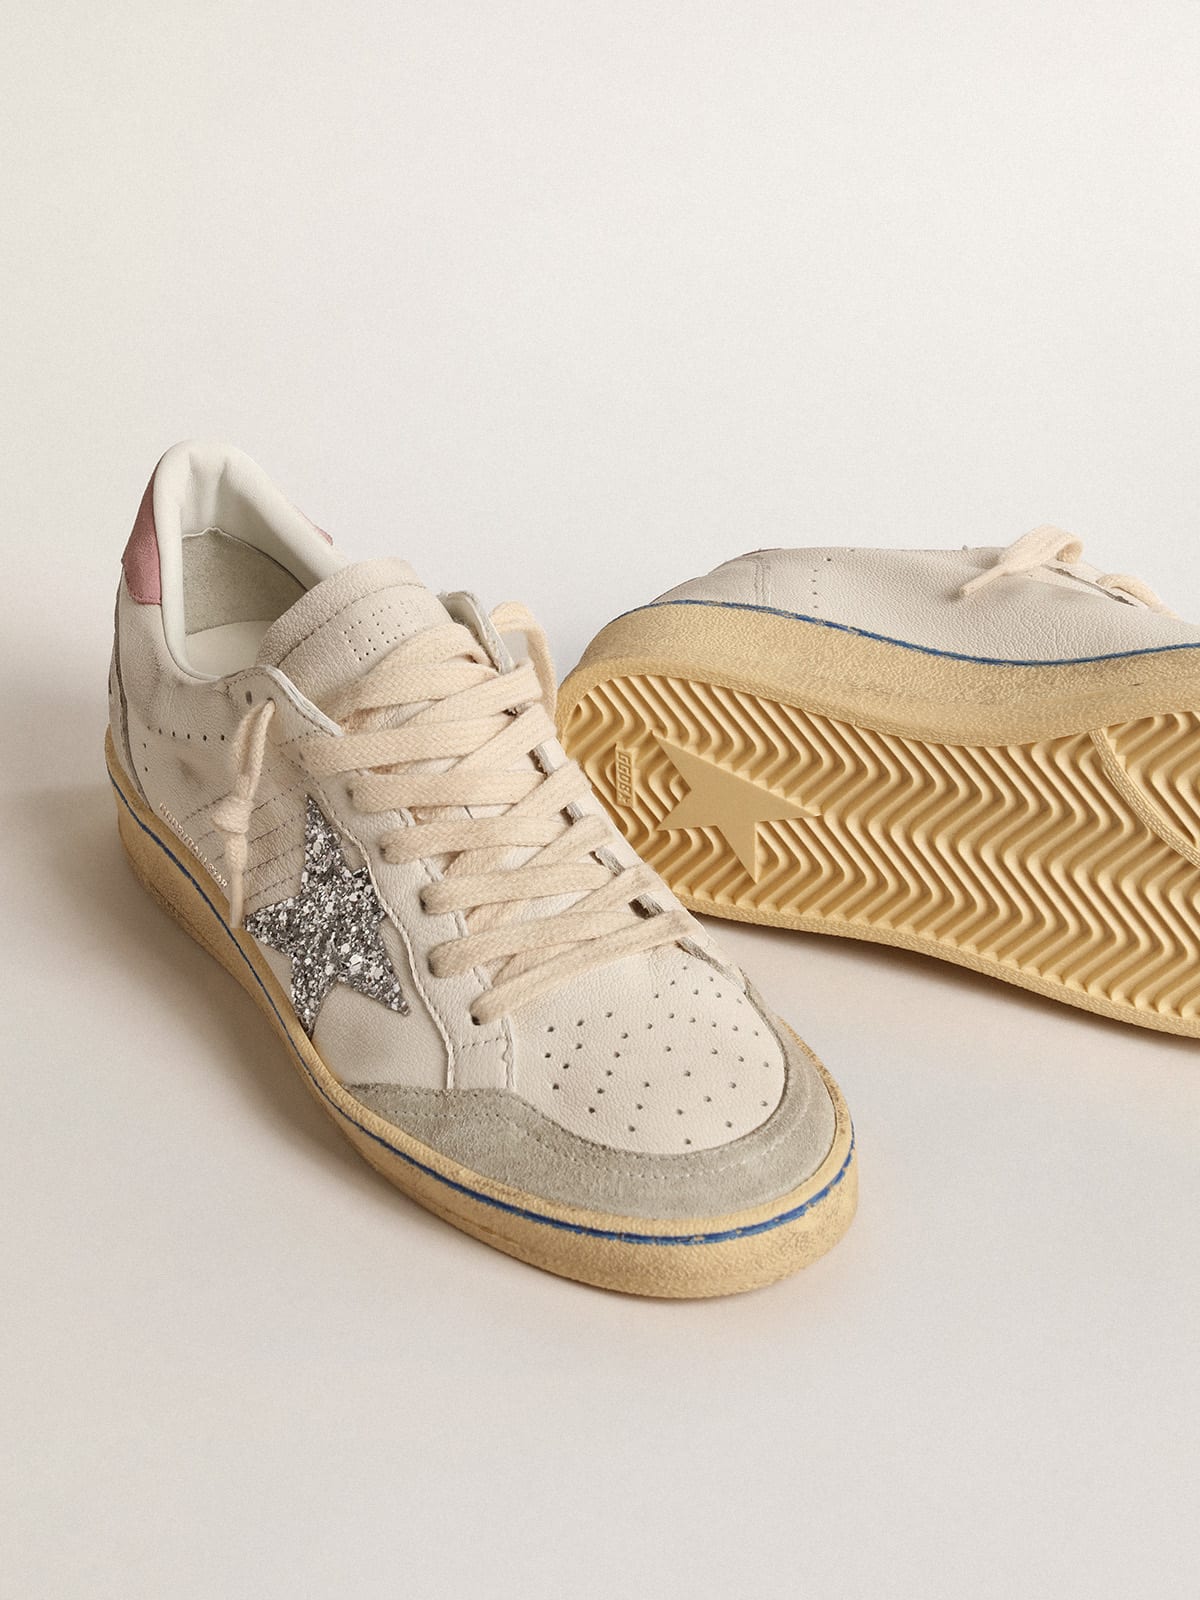 Golden Goose - Ball Star LTD with glitter star and pink suede heel tab in 